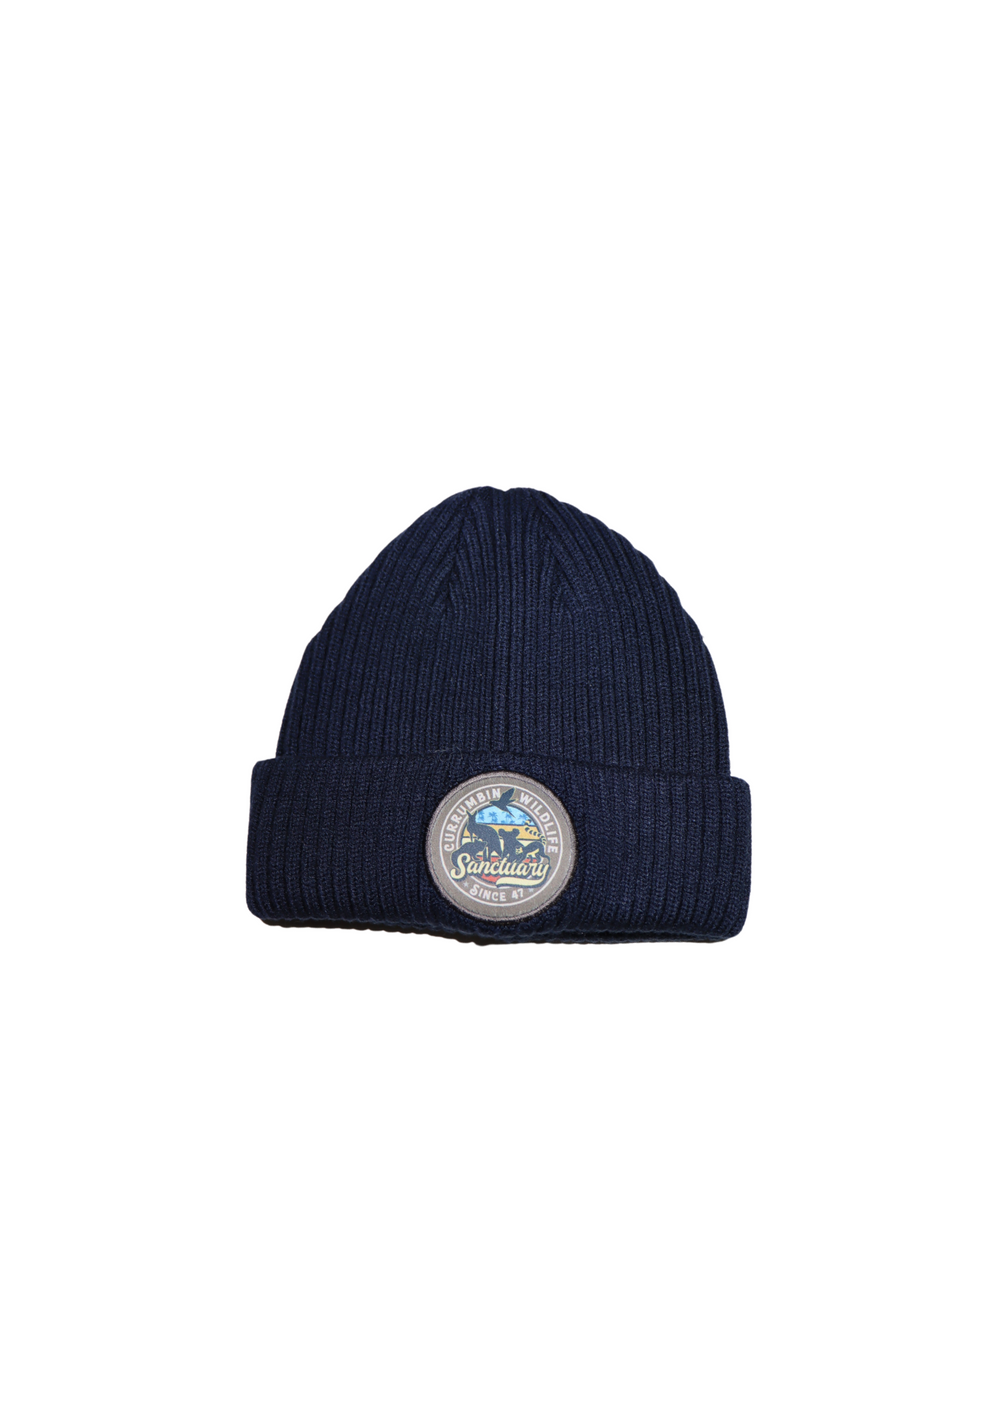 CWS Since 47 Montage Adult Beanie - Navy